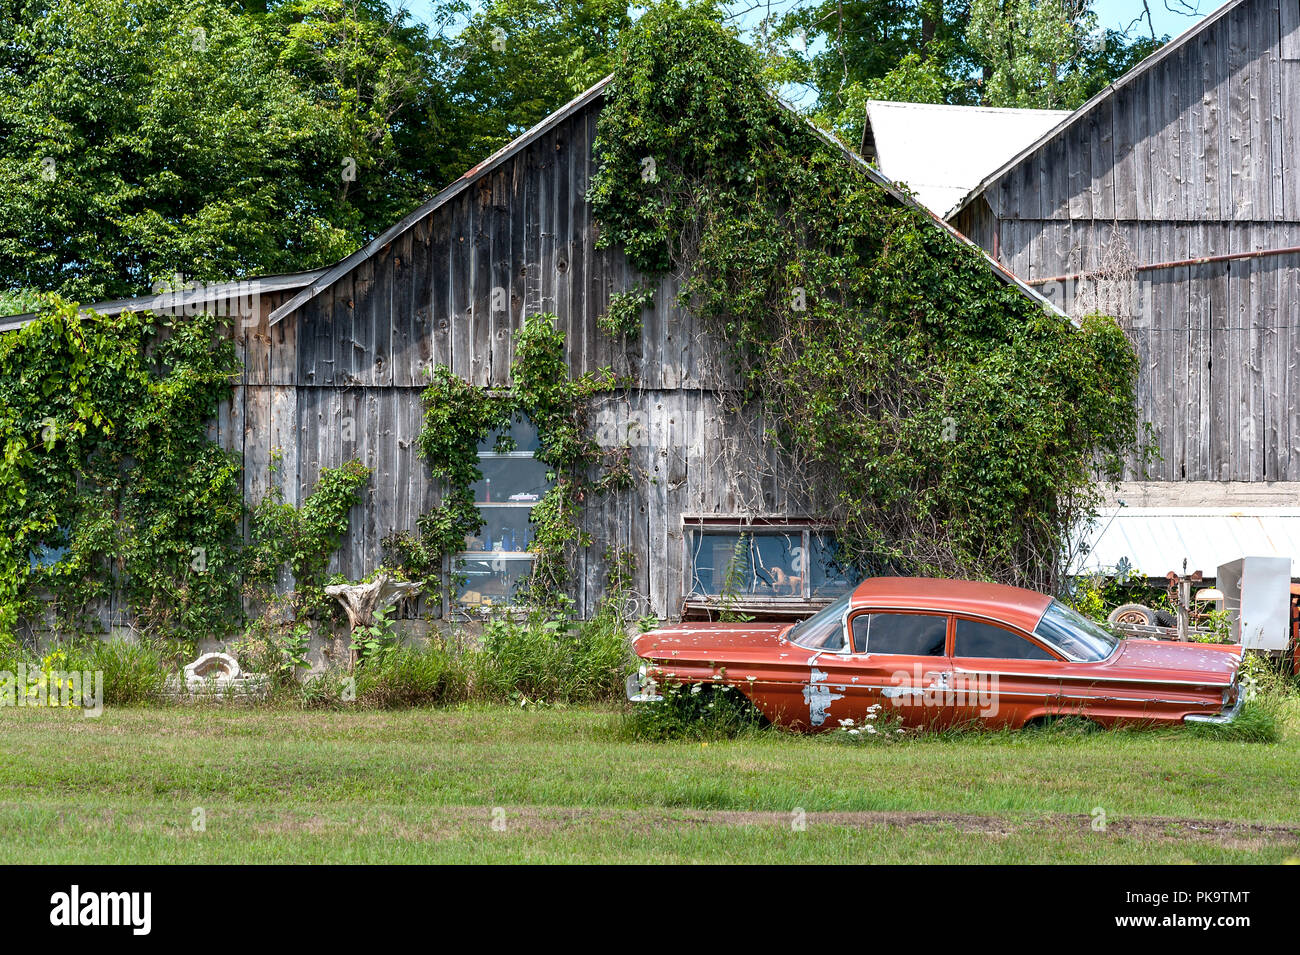 Abandoned Ford Mercury by barn Stock Photo